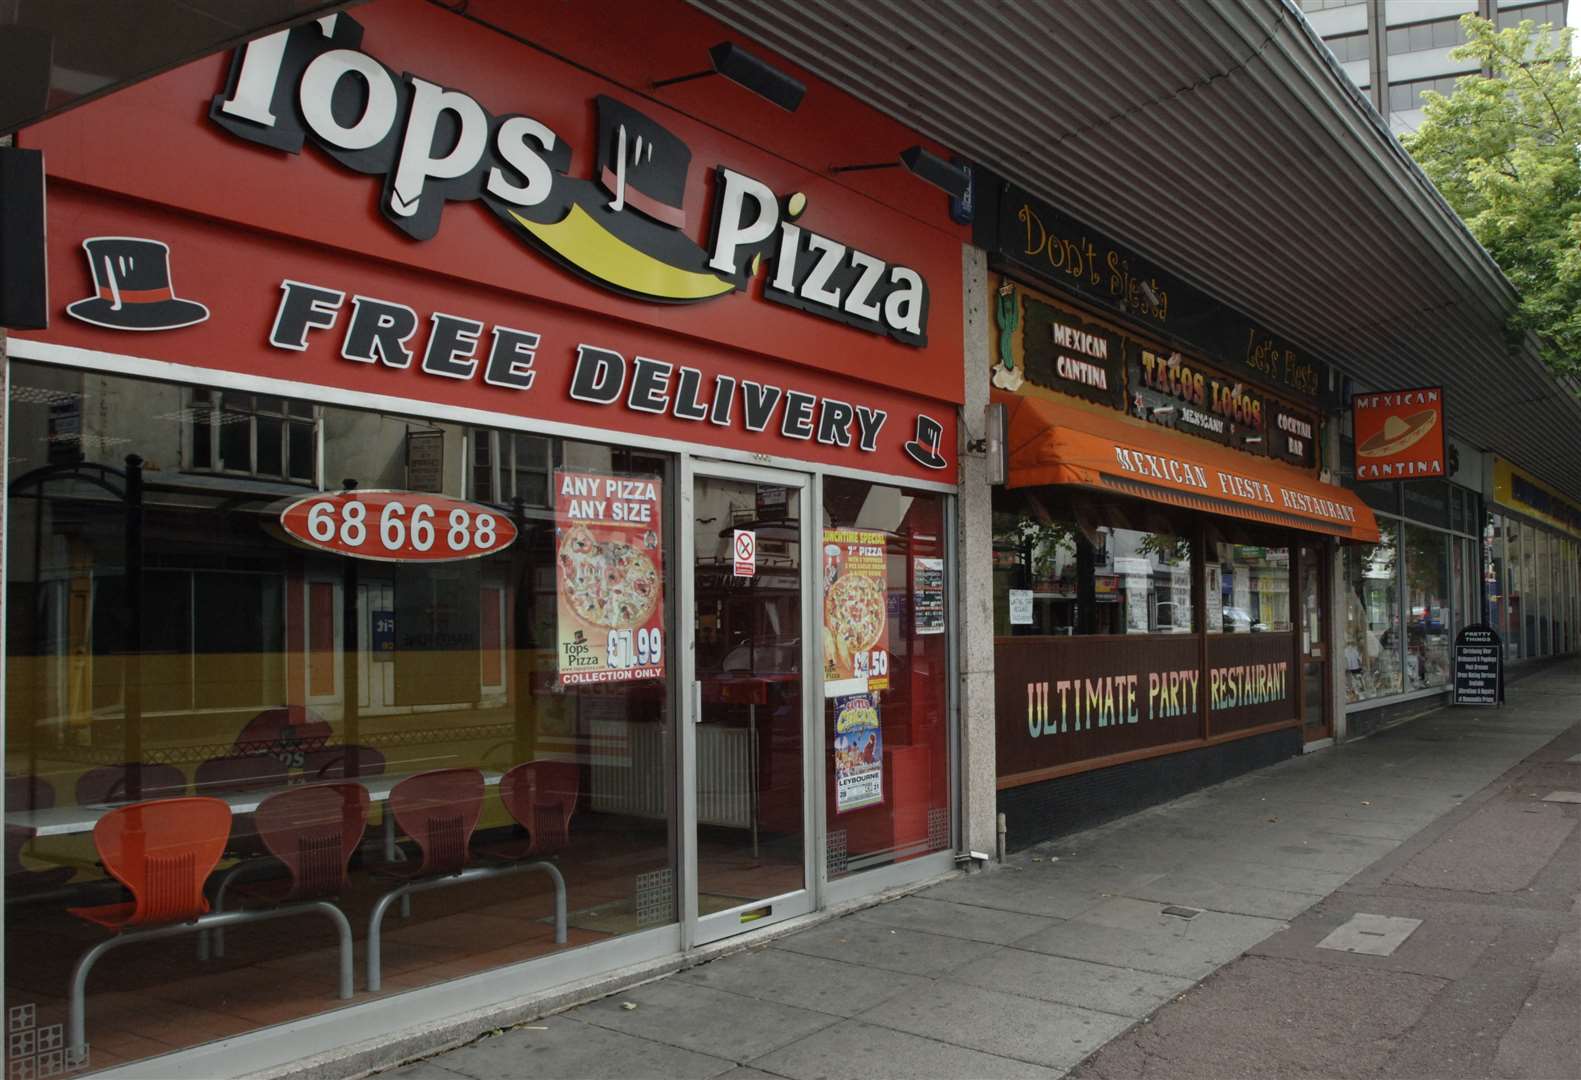 Tops Pizza in Lower Stone Street, Maidstone. Picture: John Wardley